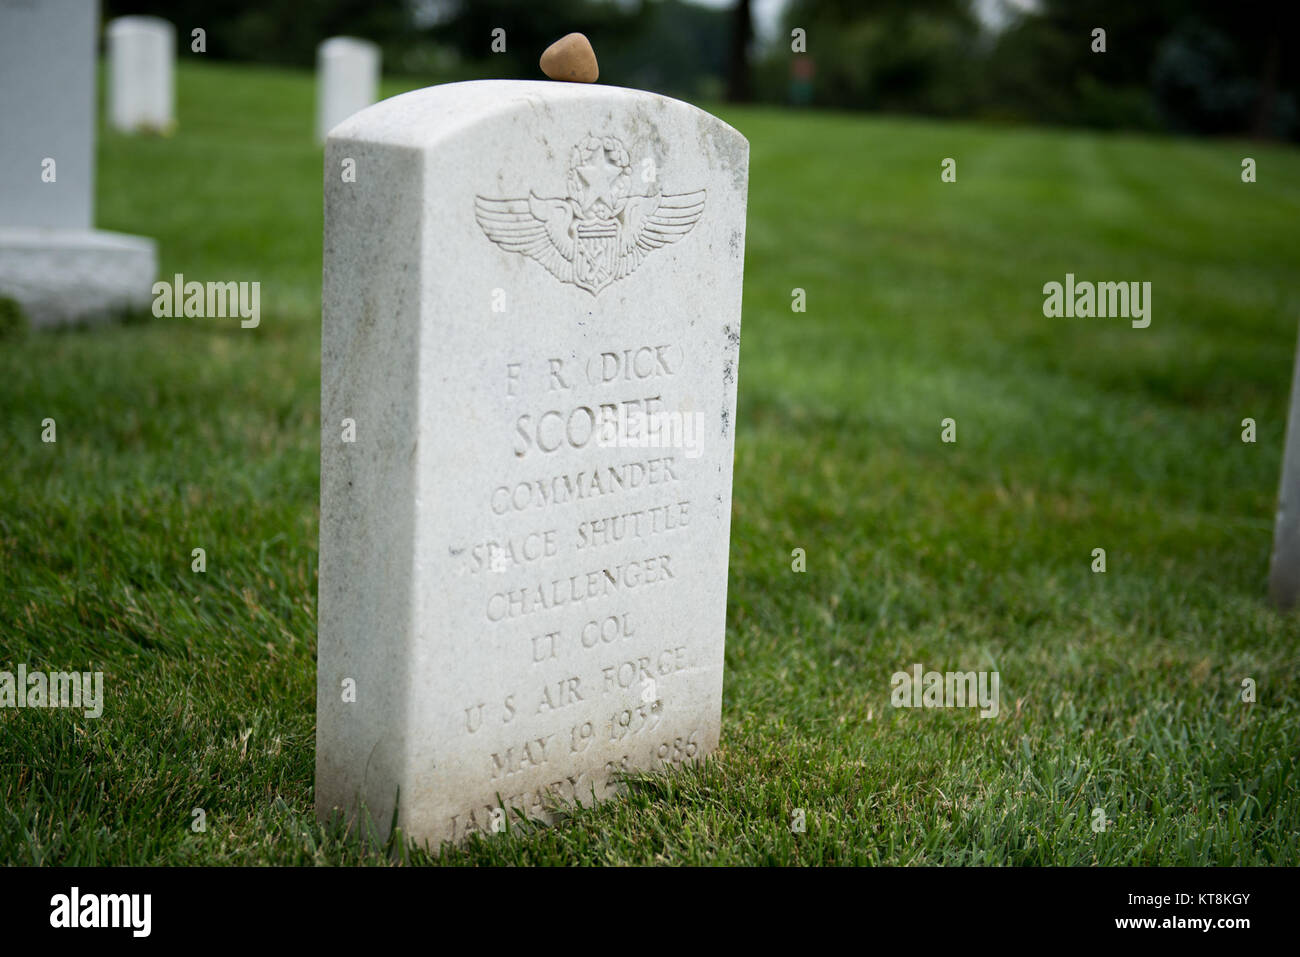 Lt. Col. Francis R. Scobee, U.S. Air Force, Section 46, grave 1129-4 of Arlington National Cemetery, was interred May 19, 1986. Scobee was killed in the Jan. 28, 1986, explosion of the Space Shuttle Challenger. An Air Force full-honor memorial service was held at the Old Post Chapel at Fort Myer. (U.S. Army photo by Rachel Larue/released) Stock Photo